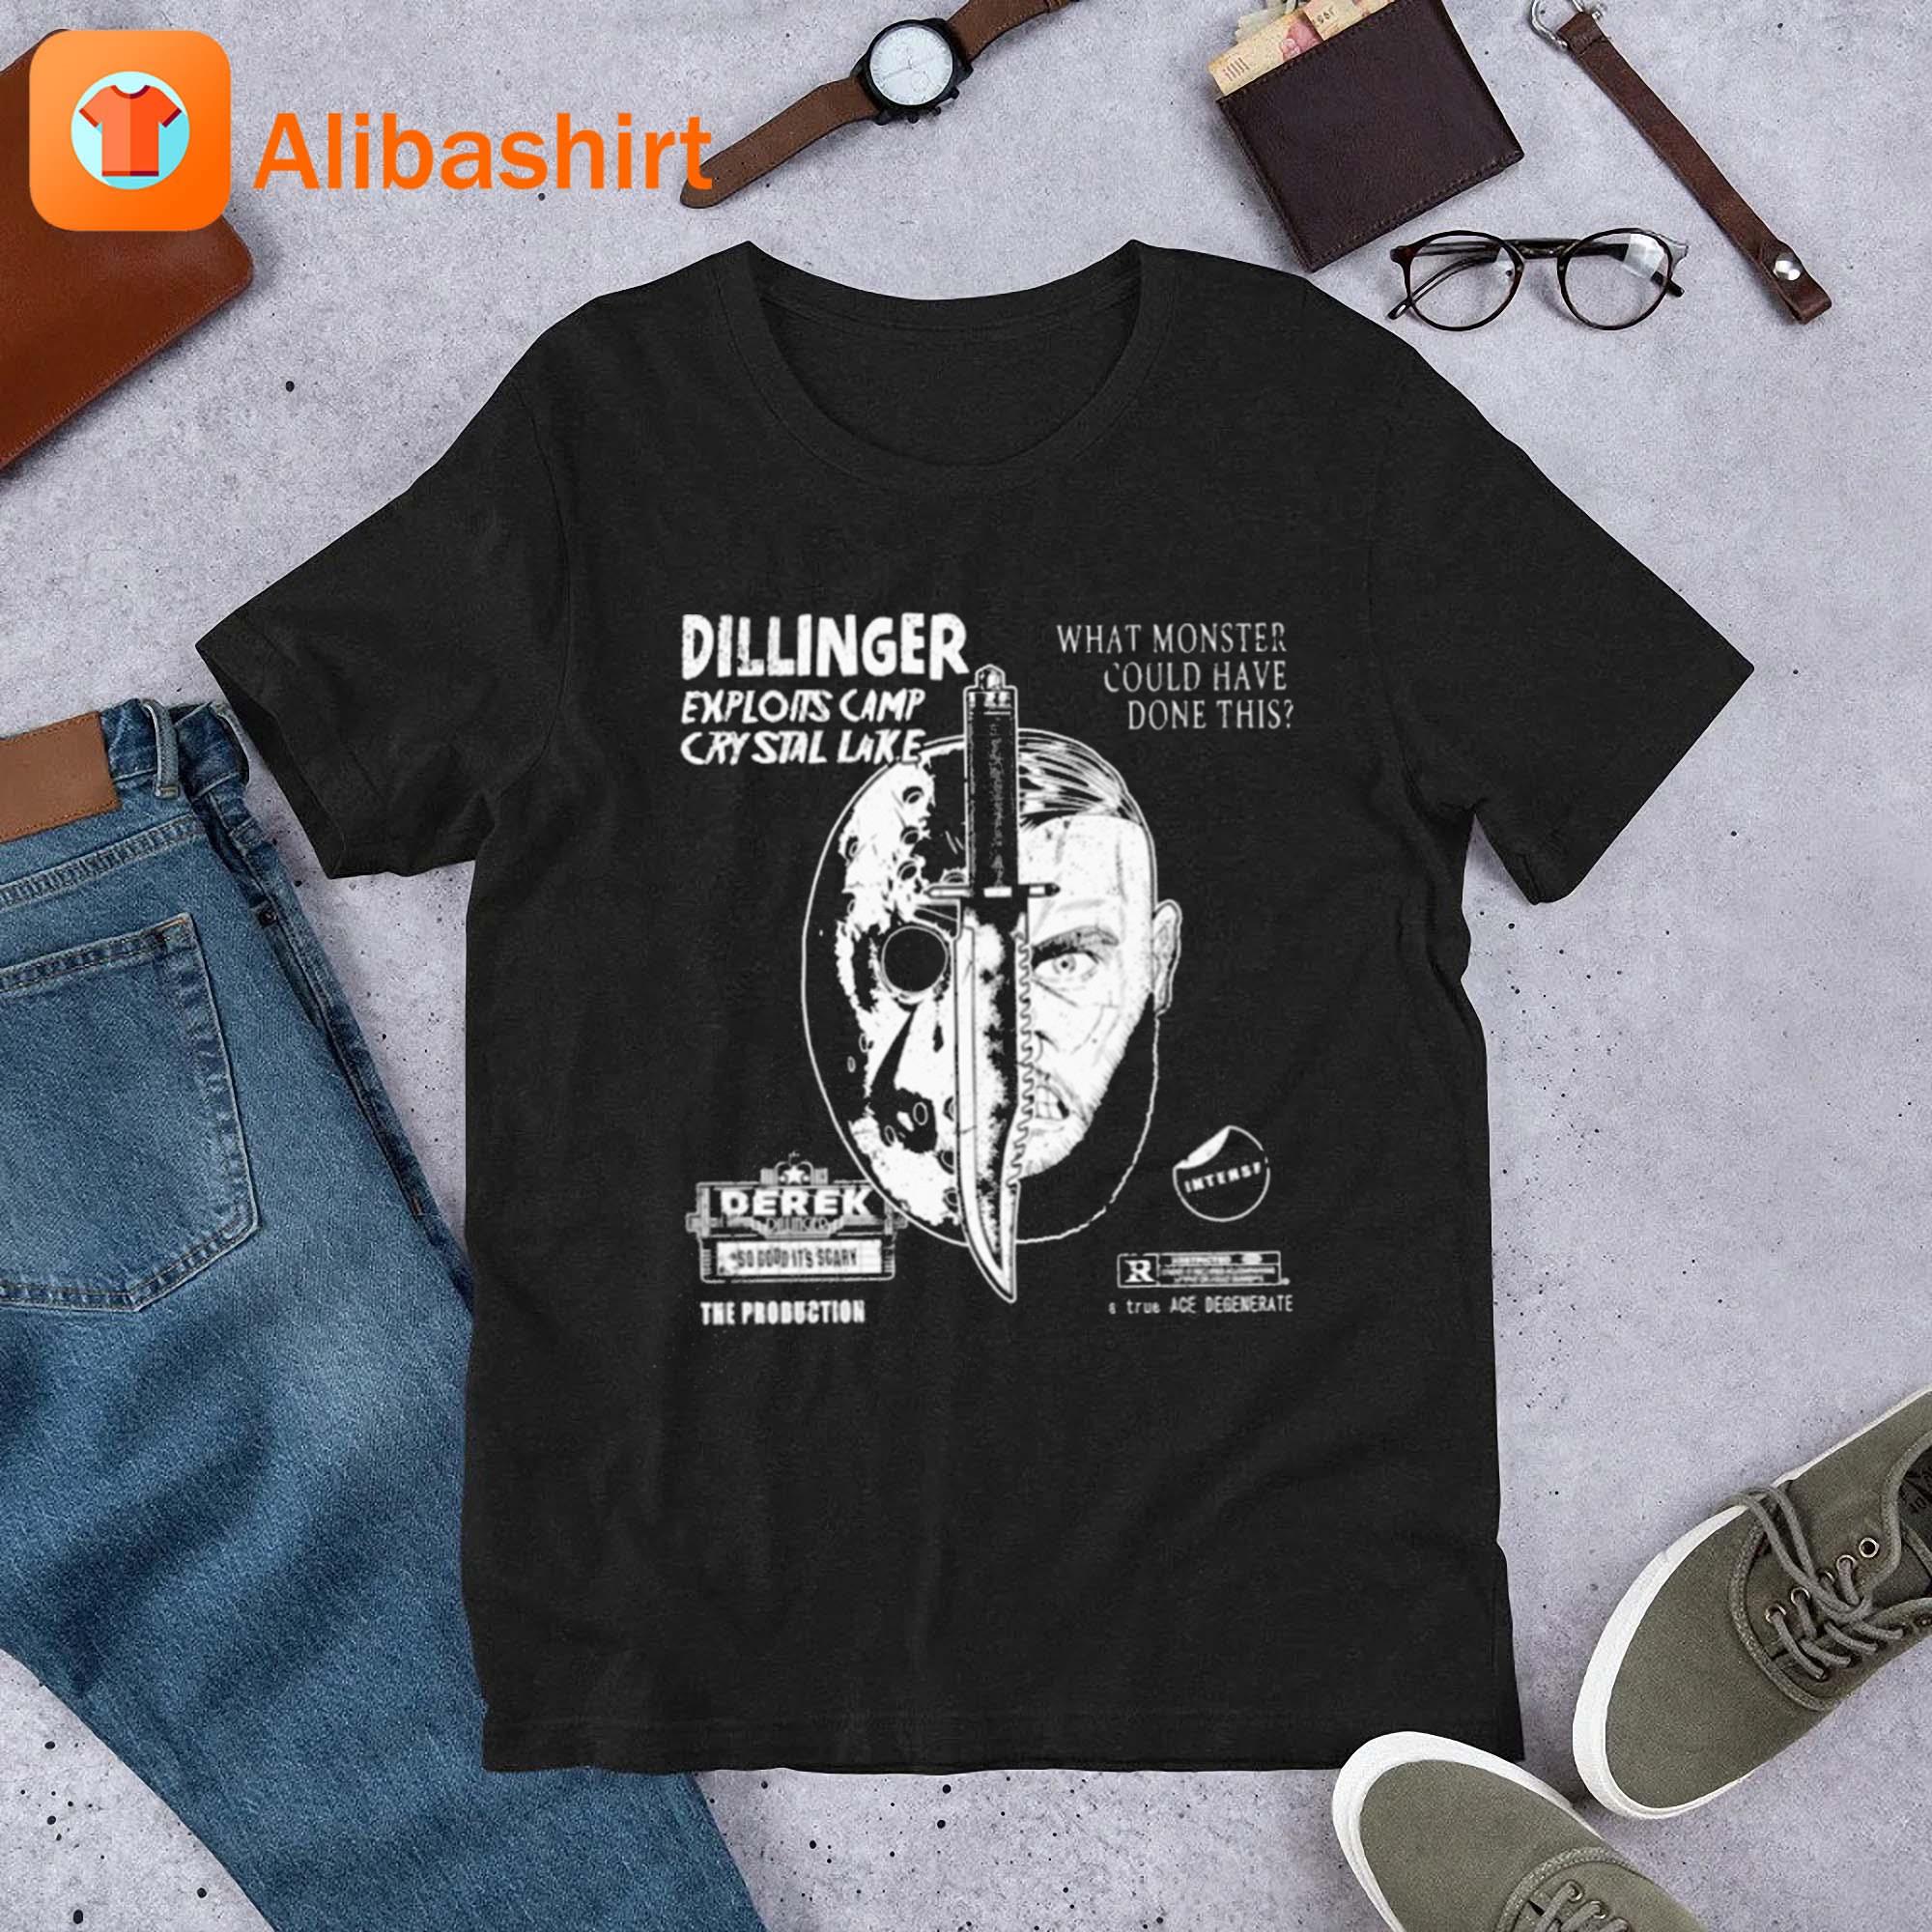 Dillinger Exploits Camp Crystal Lake What Monster Could Have Done This Shirt